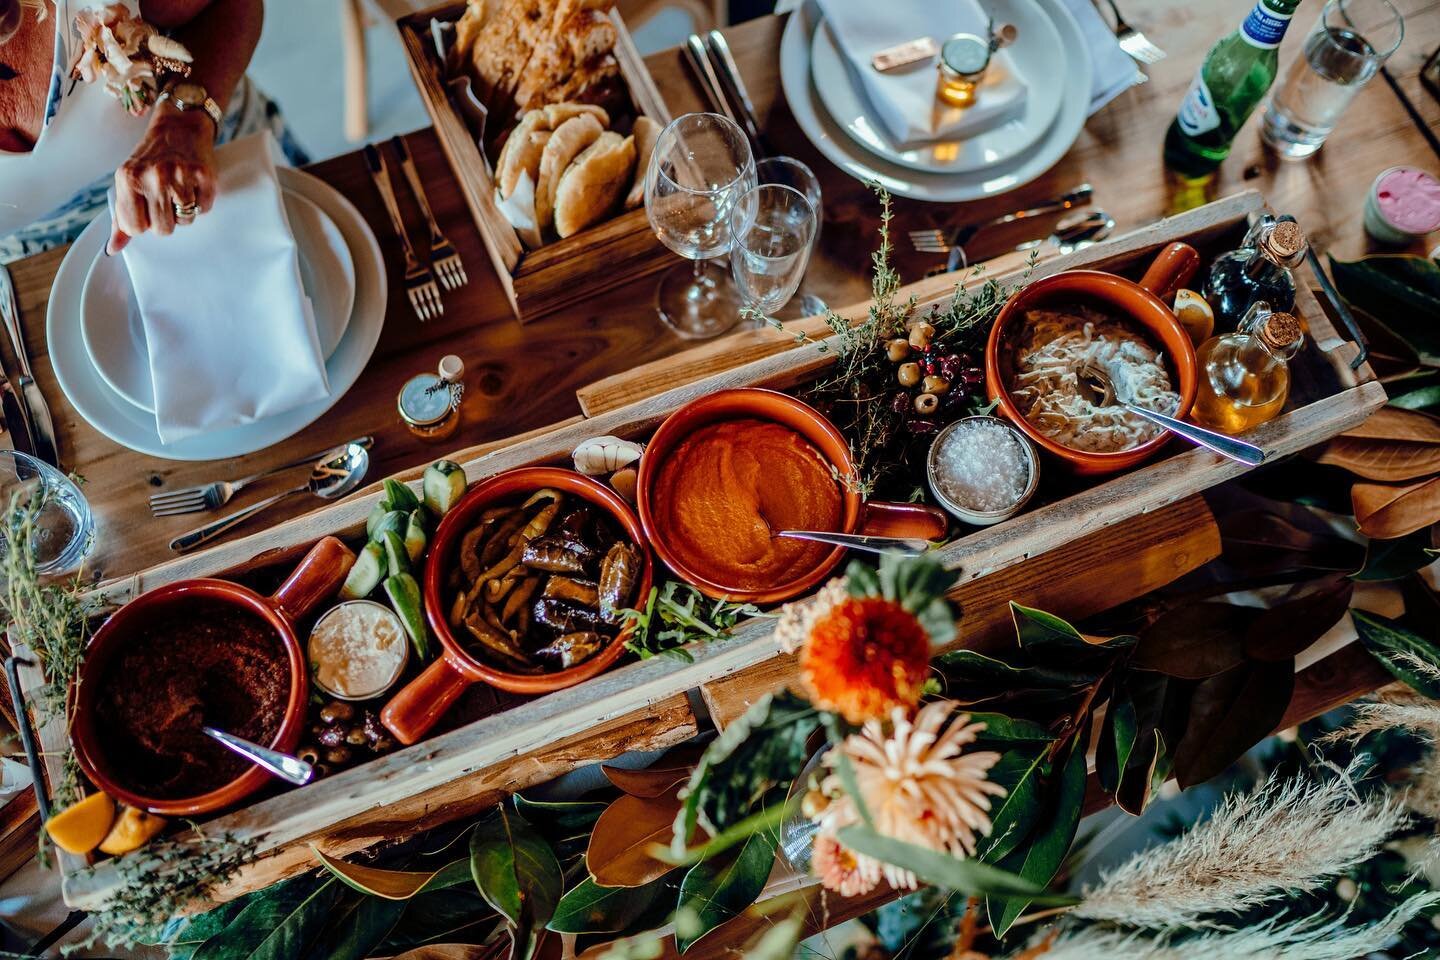 A feast for your eyes! Couples usually wonder how the decor will work around the food, cluster table decor is the way forward so we can shuffle things to make way for the yummy feasting food! These platters from @babaganoushyorkshire look fab and are